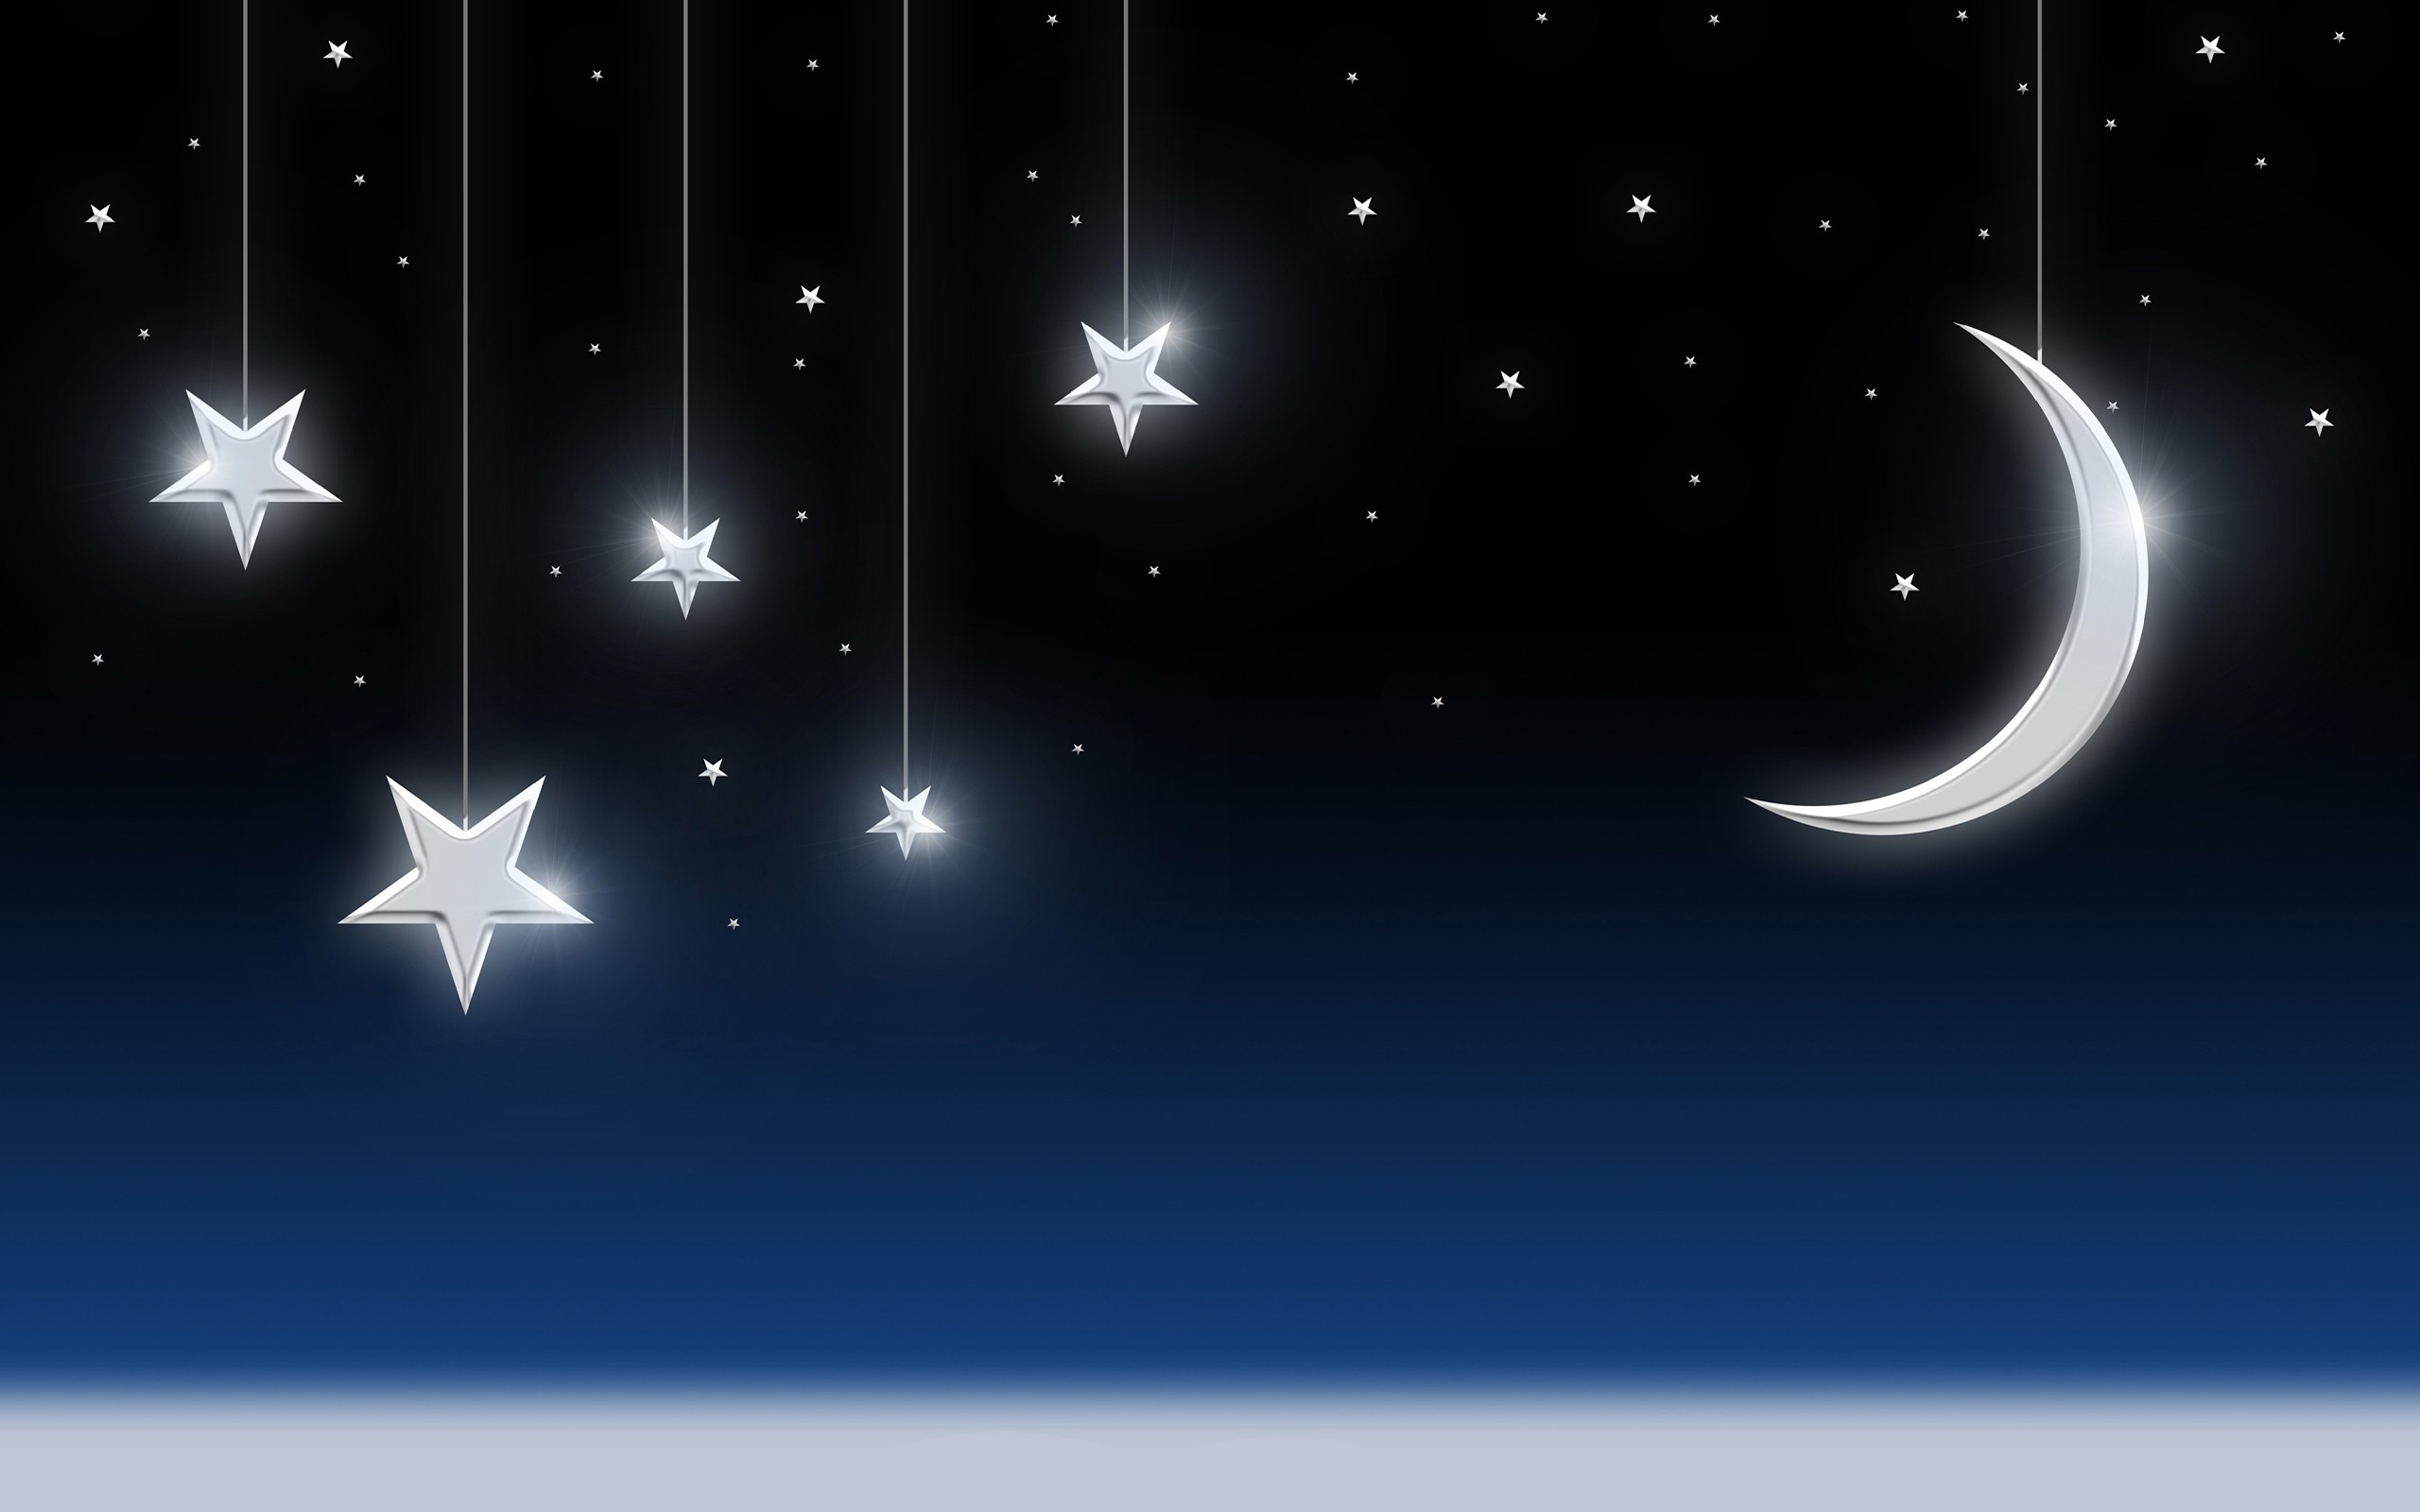 Moon And Star Background Wallpaper - Star And Moon Background - HD Wallpaper 